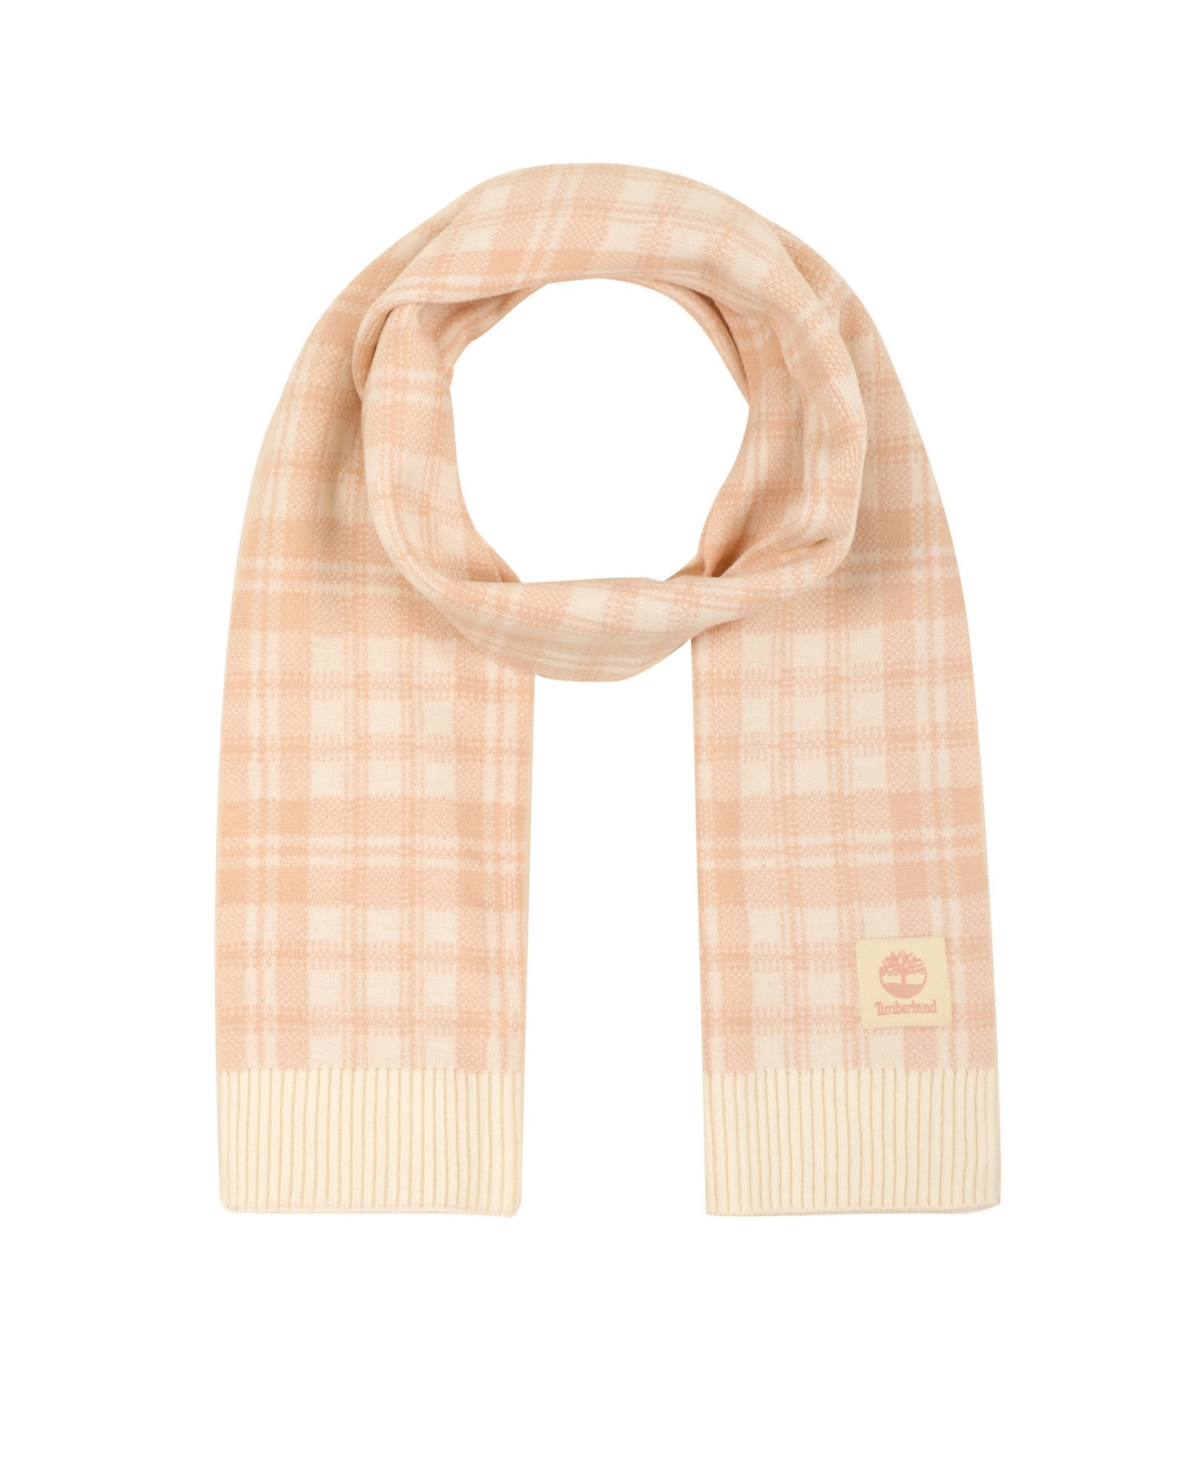 Timberland Women's Plaid Scarf In Cameo Rose,cream